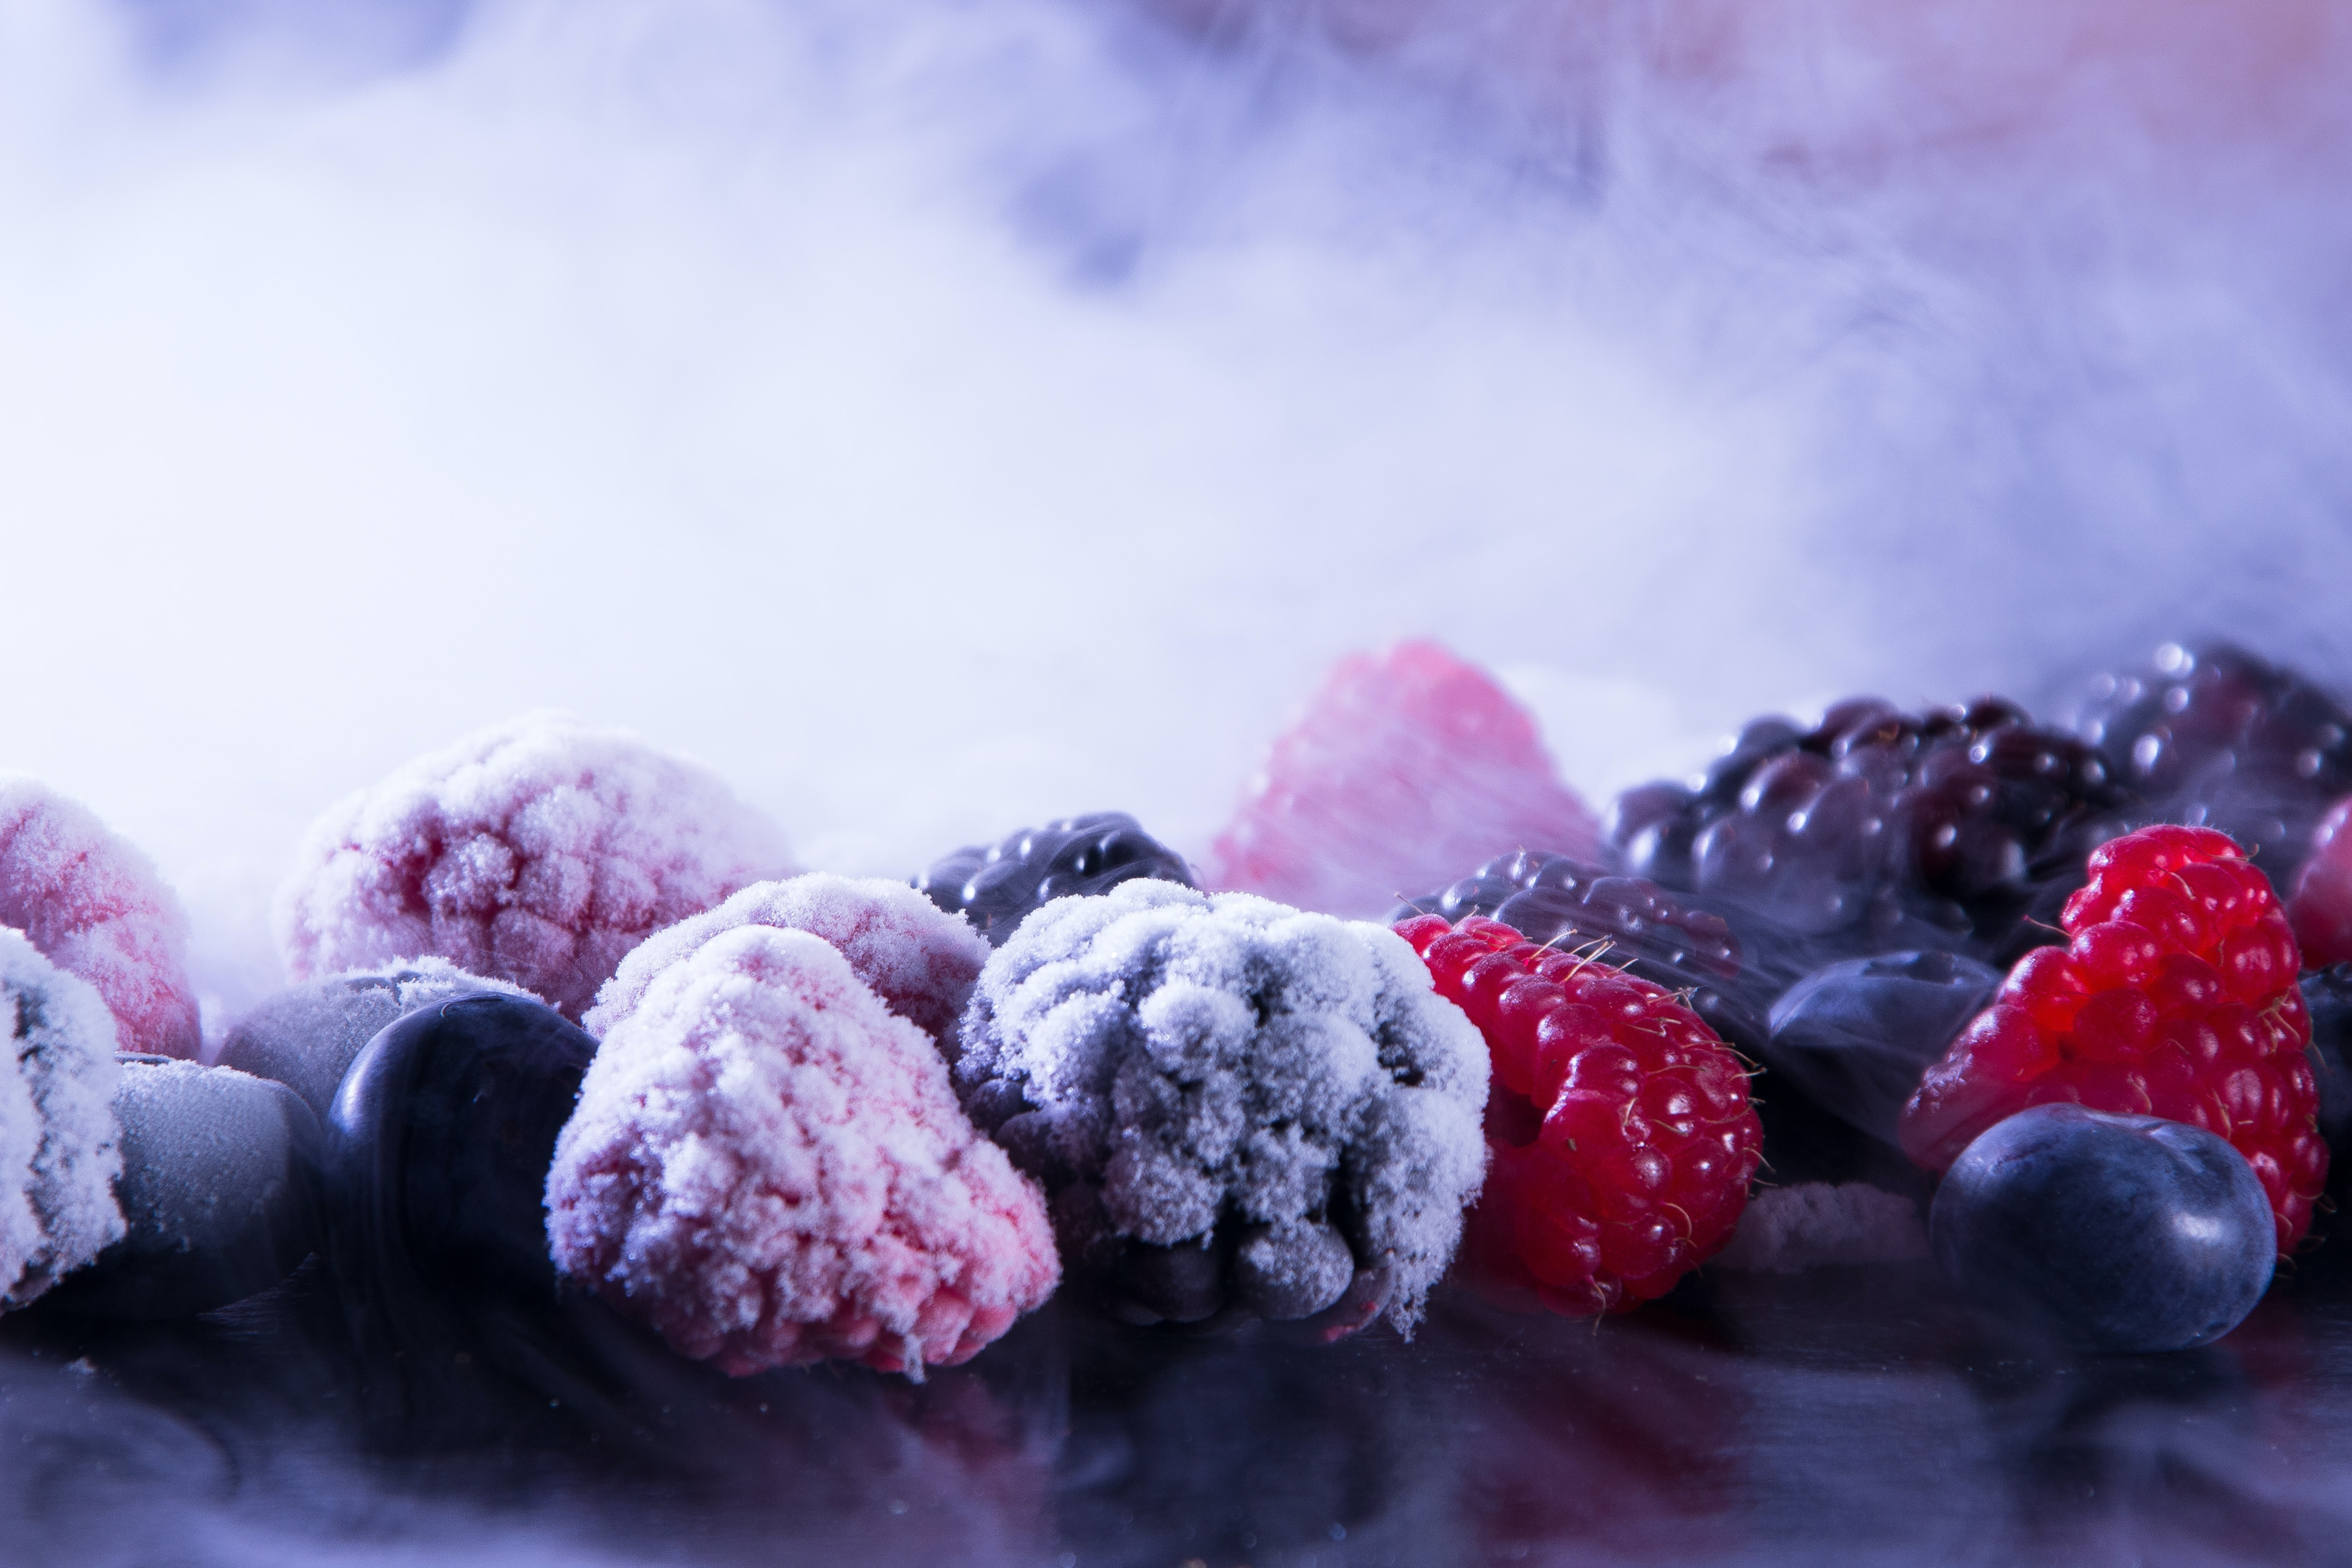 Frozen berries primed for the freeze-drying process.